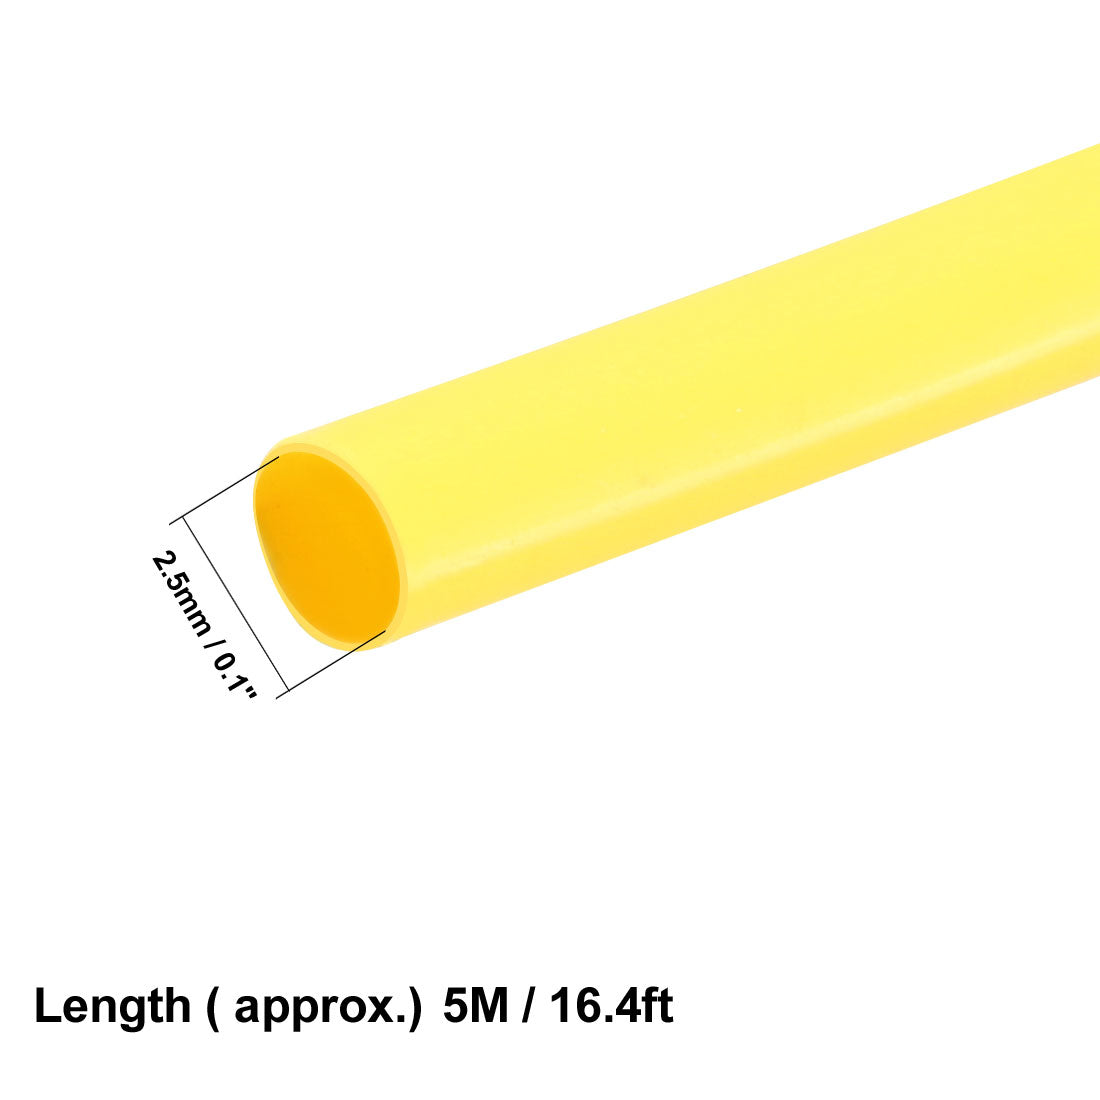 uxcell Uxcell Heat Shrink Tube 2:1 Electrical Insulation Tube Wire Cable Tubing Sleeving Wrap Yellow 2.5mm Diameter 5m Long